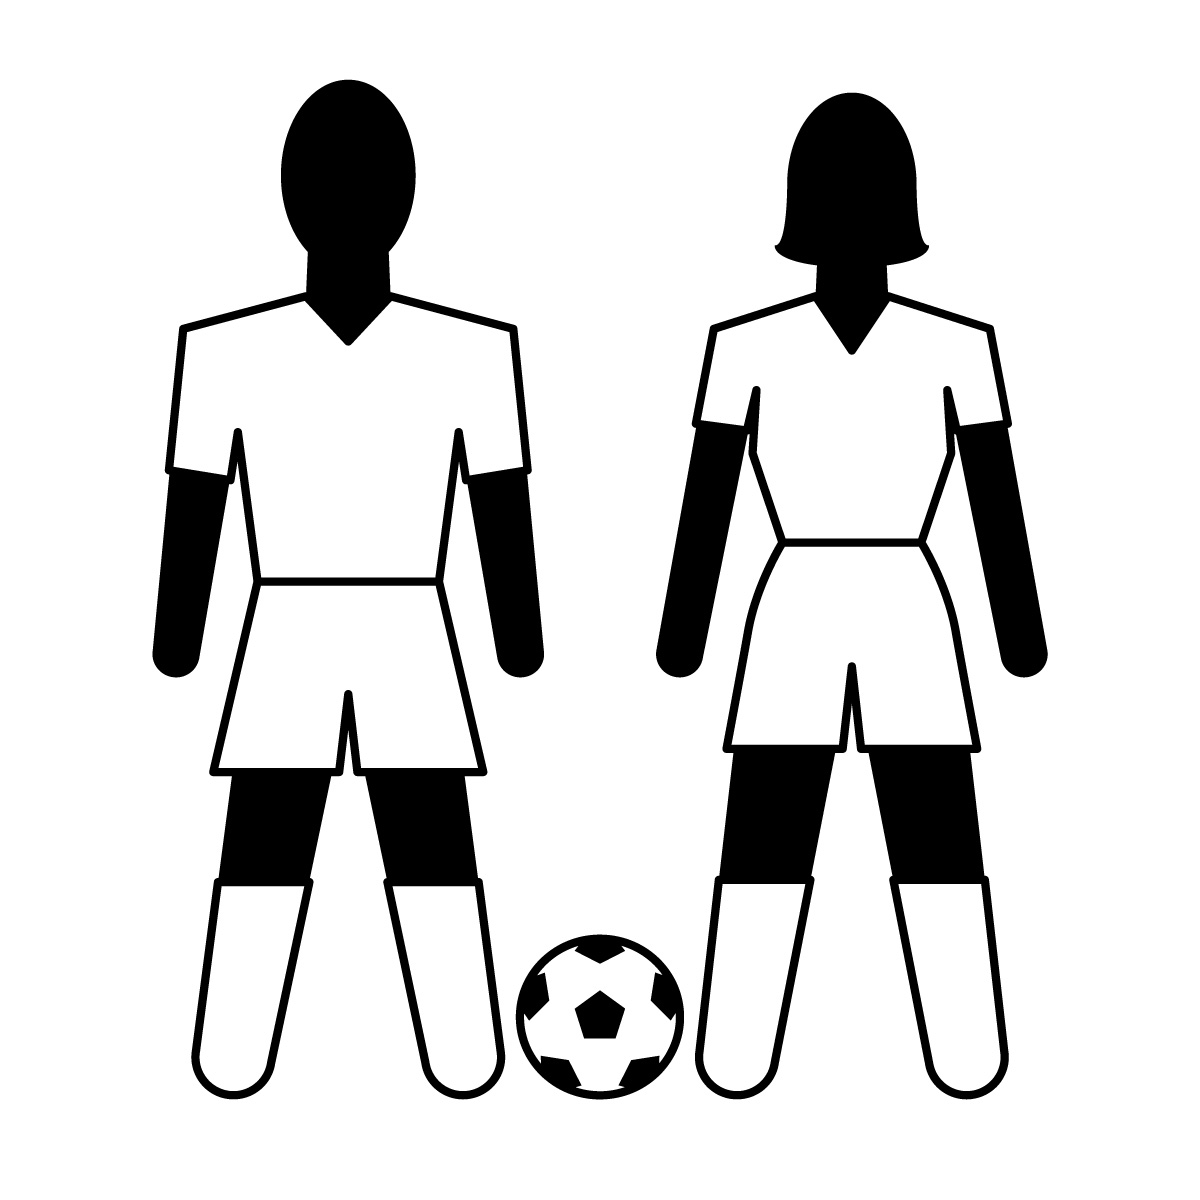 Kicking A Soccer Goal Clipart | Clipart Panda - Free Clipart Images